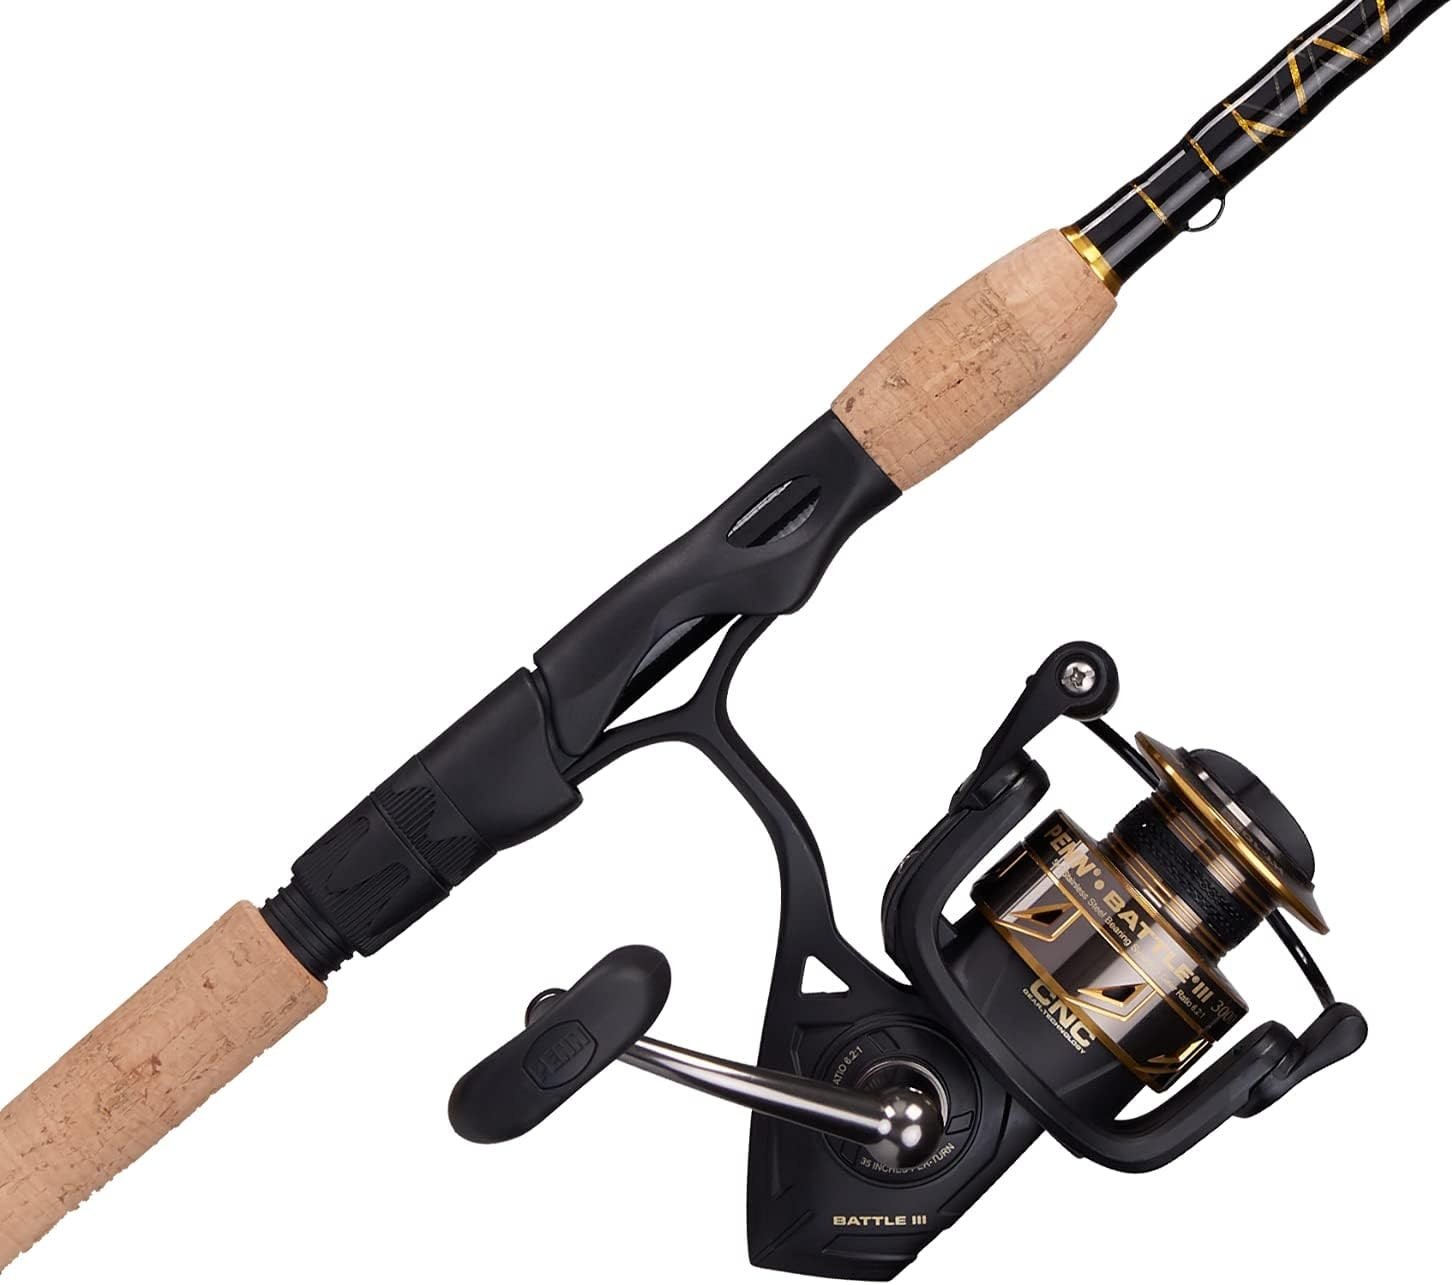 PENN 6’6” Battle III Fishing Rod and Reel Spinning Combo, 6’6”, 1 Graphite  Composite Fishing Rod with 6 Reel, Durable, Break Resistant and